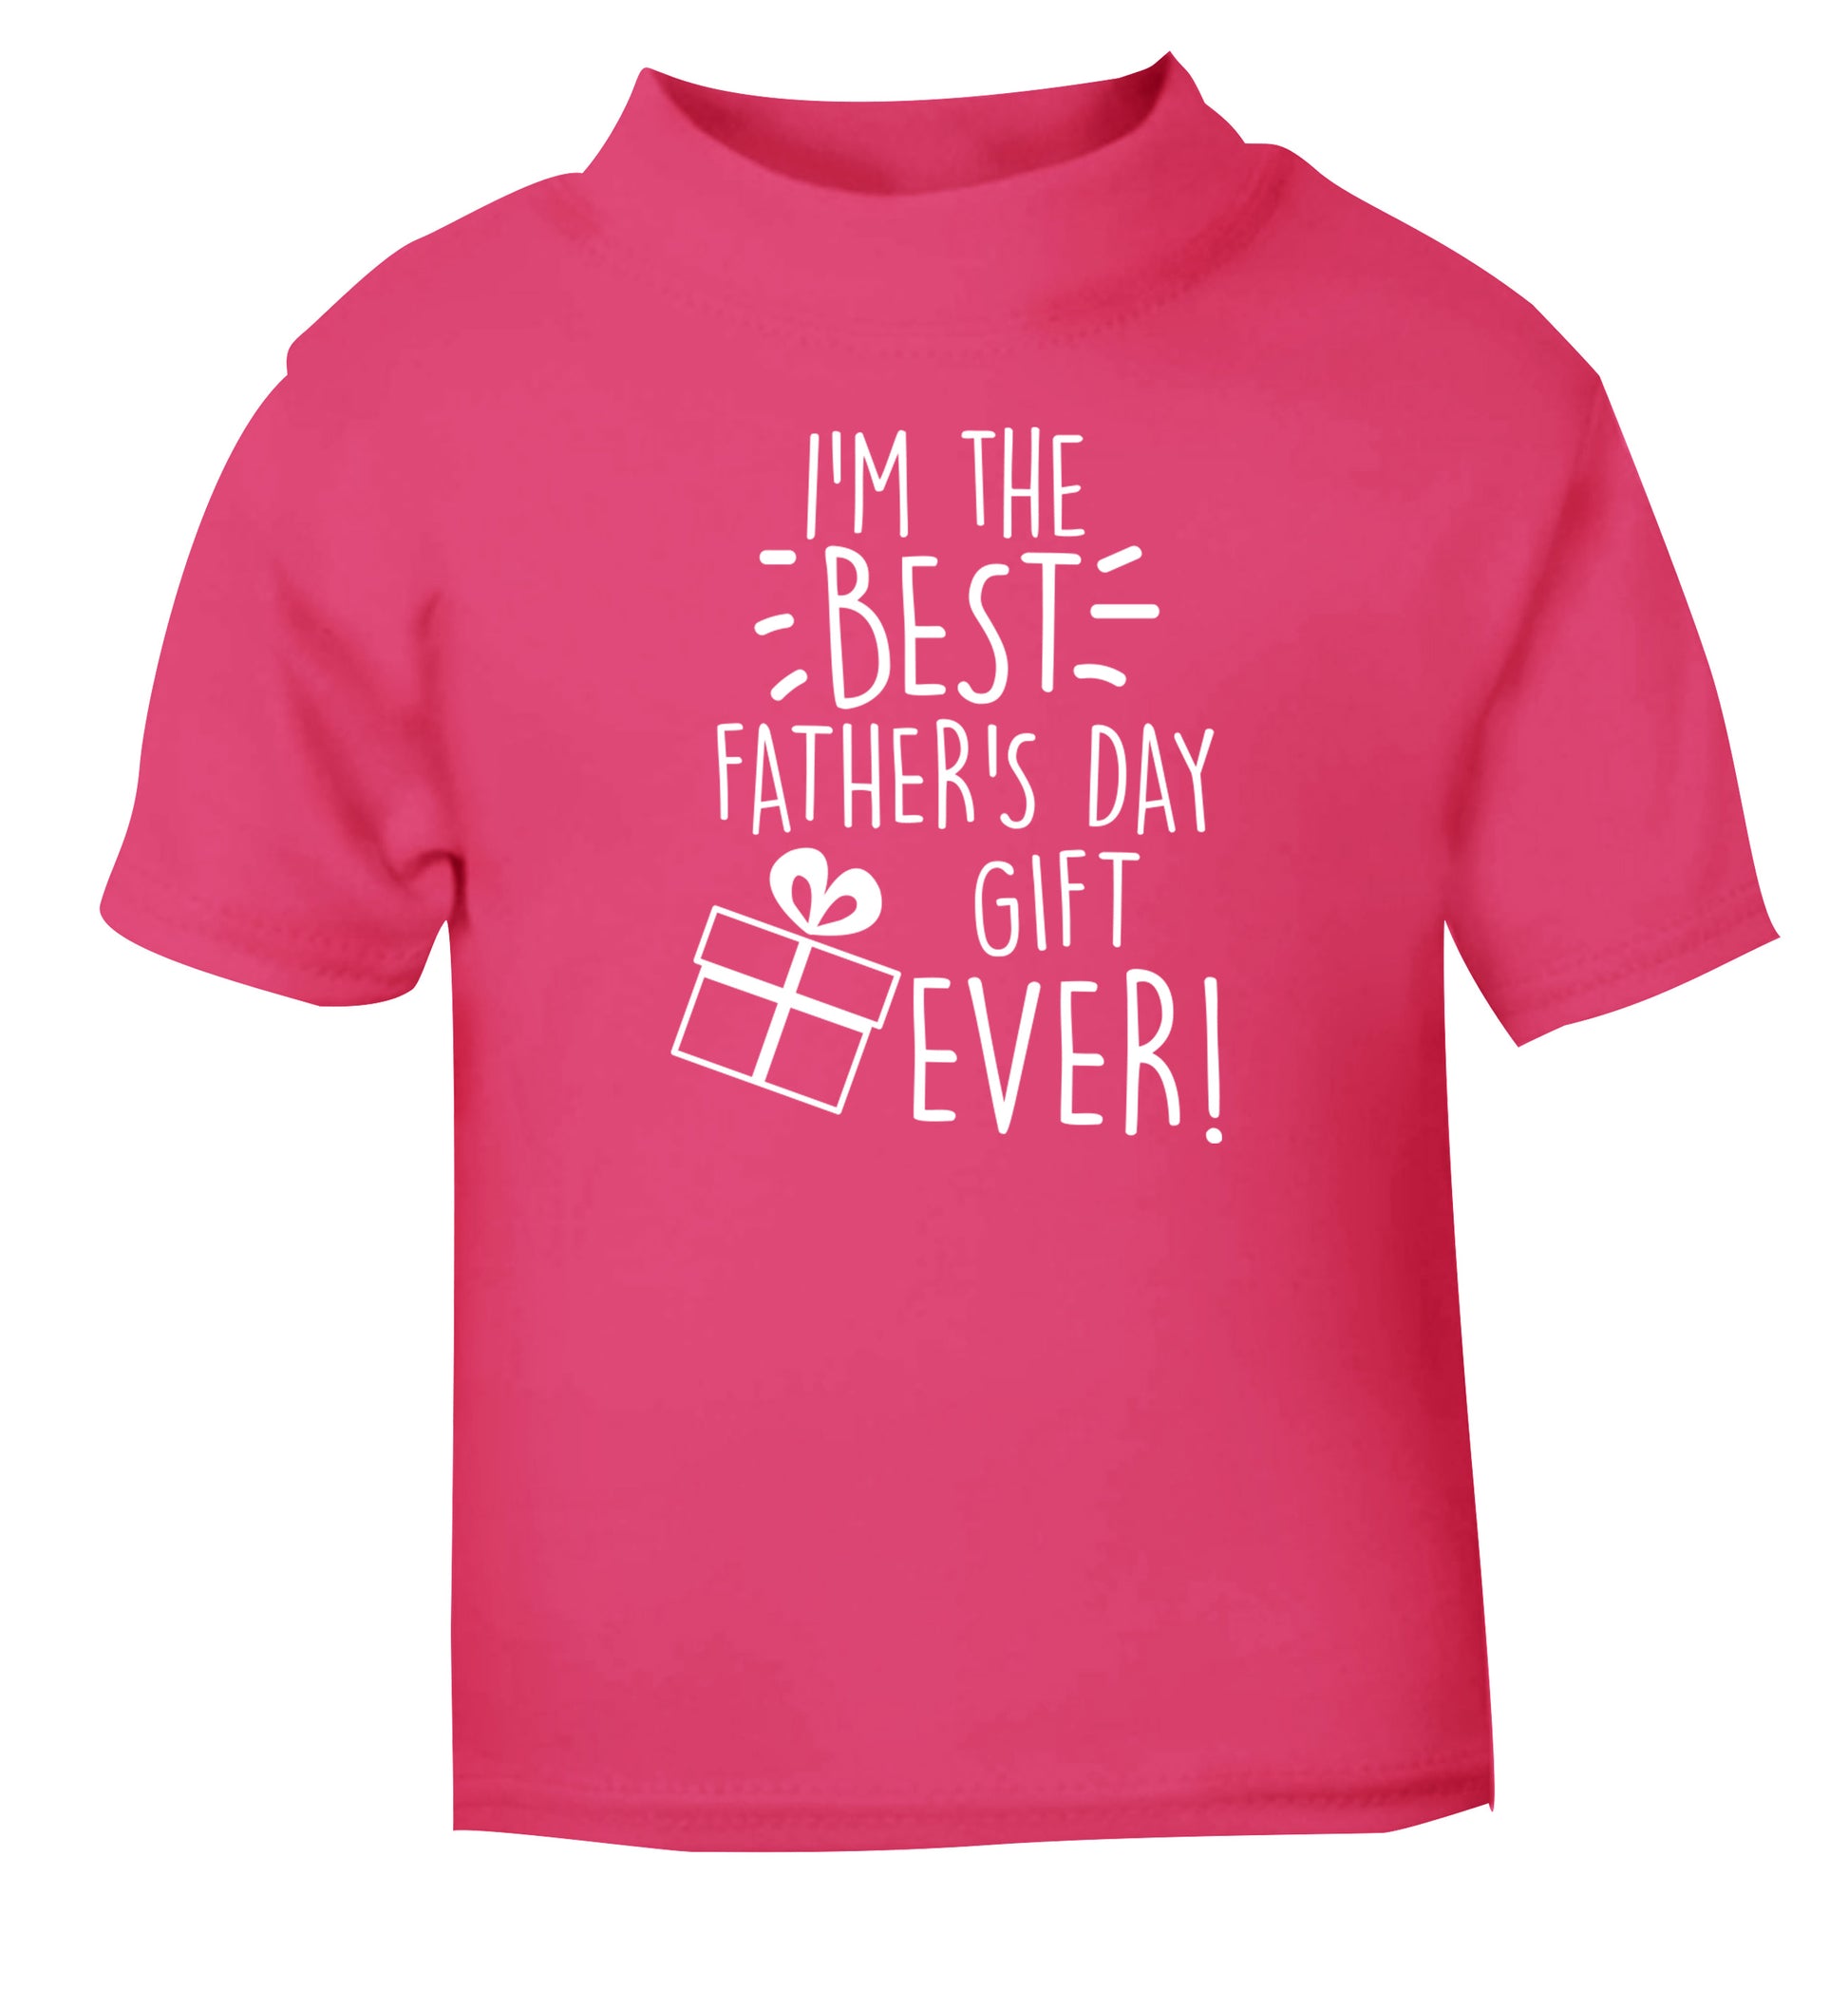 I'm the BEST father's day gift ever! pink Baby Toddler Tshirt 2 Years